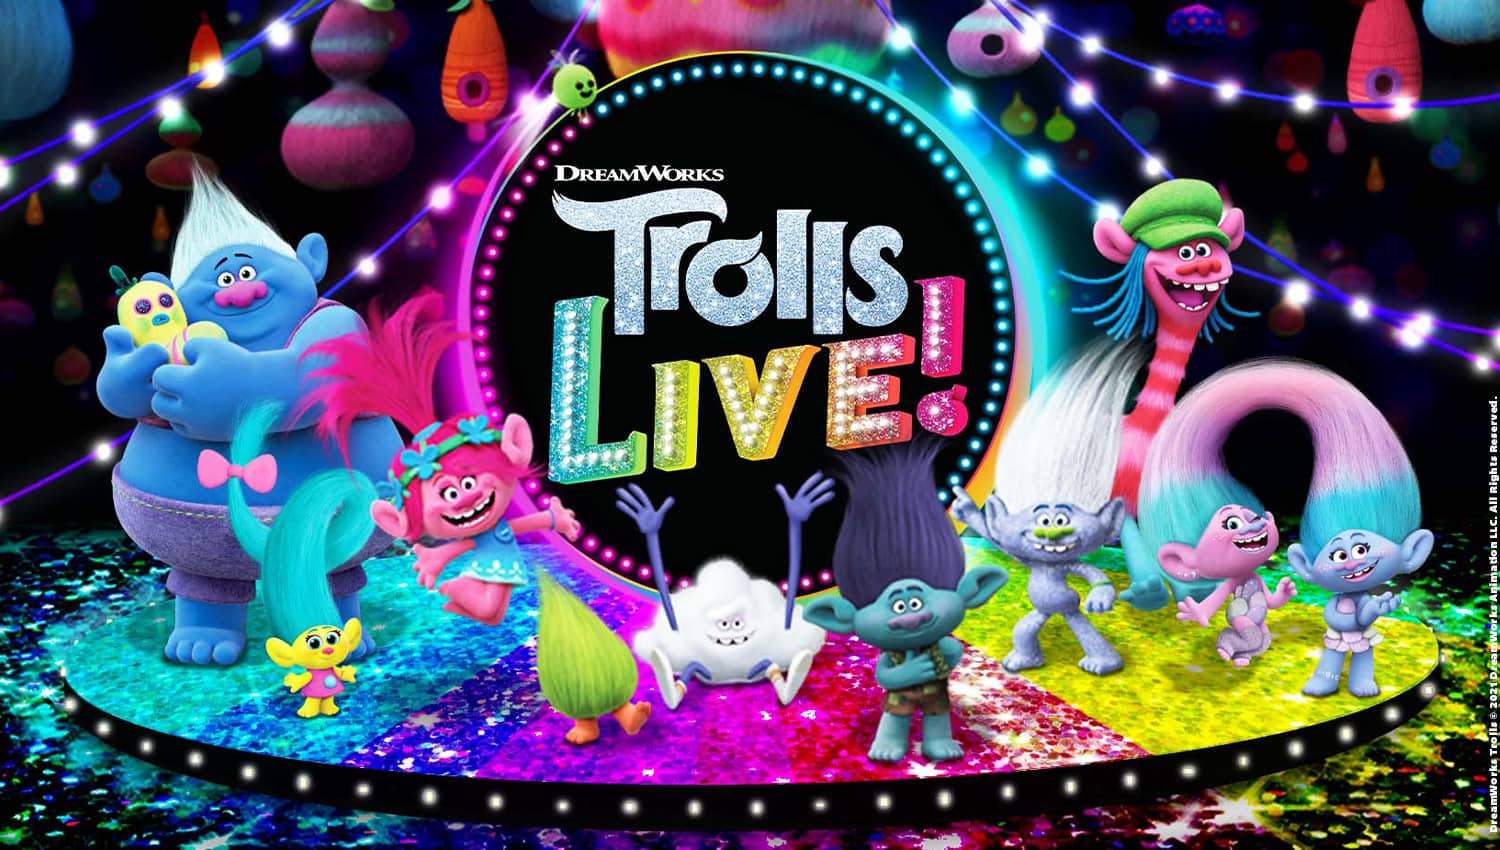 The logo for Trolls LIVE! featured on a black background. "Trolls LIVE" is written in colorful, rainbow text with a blue circle encompassing the words. The Trolls characters stand in front of and besides the words, and stand on a rainbow stage.